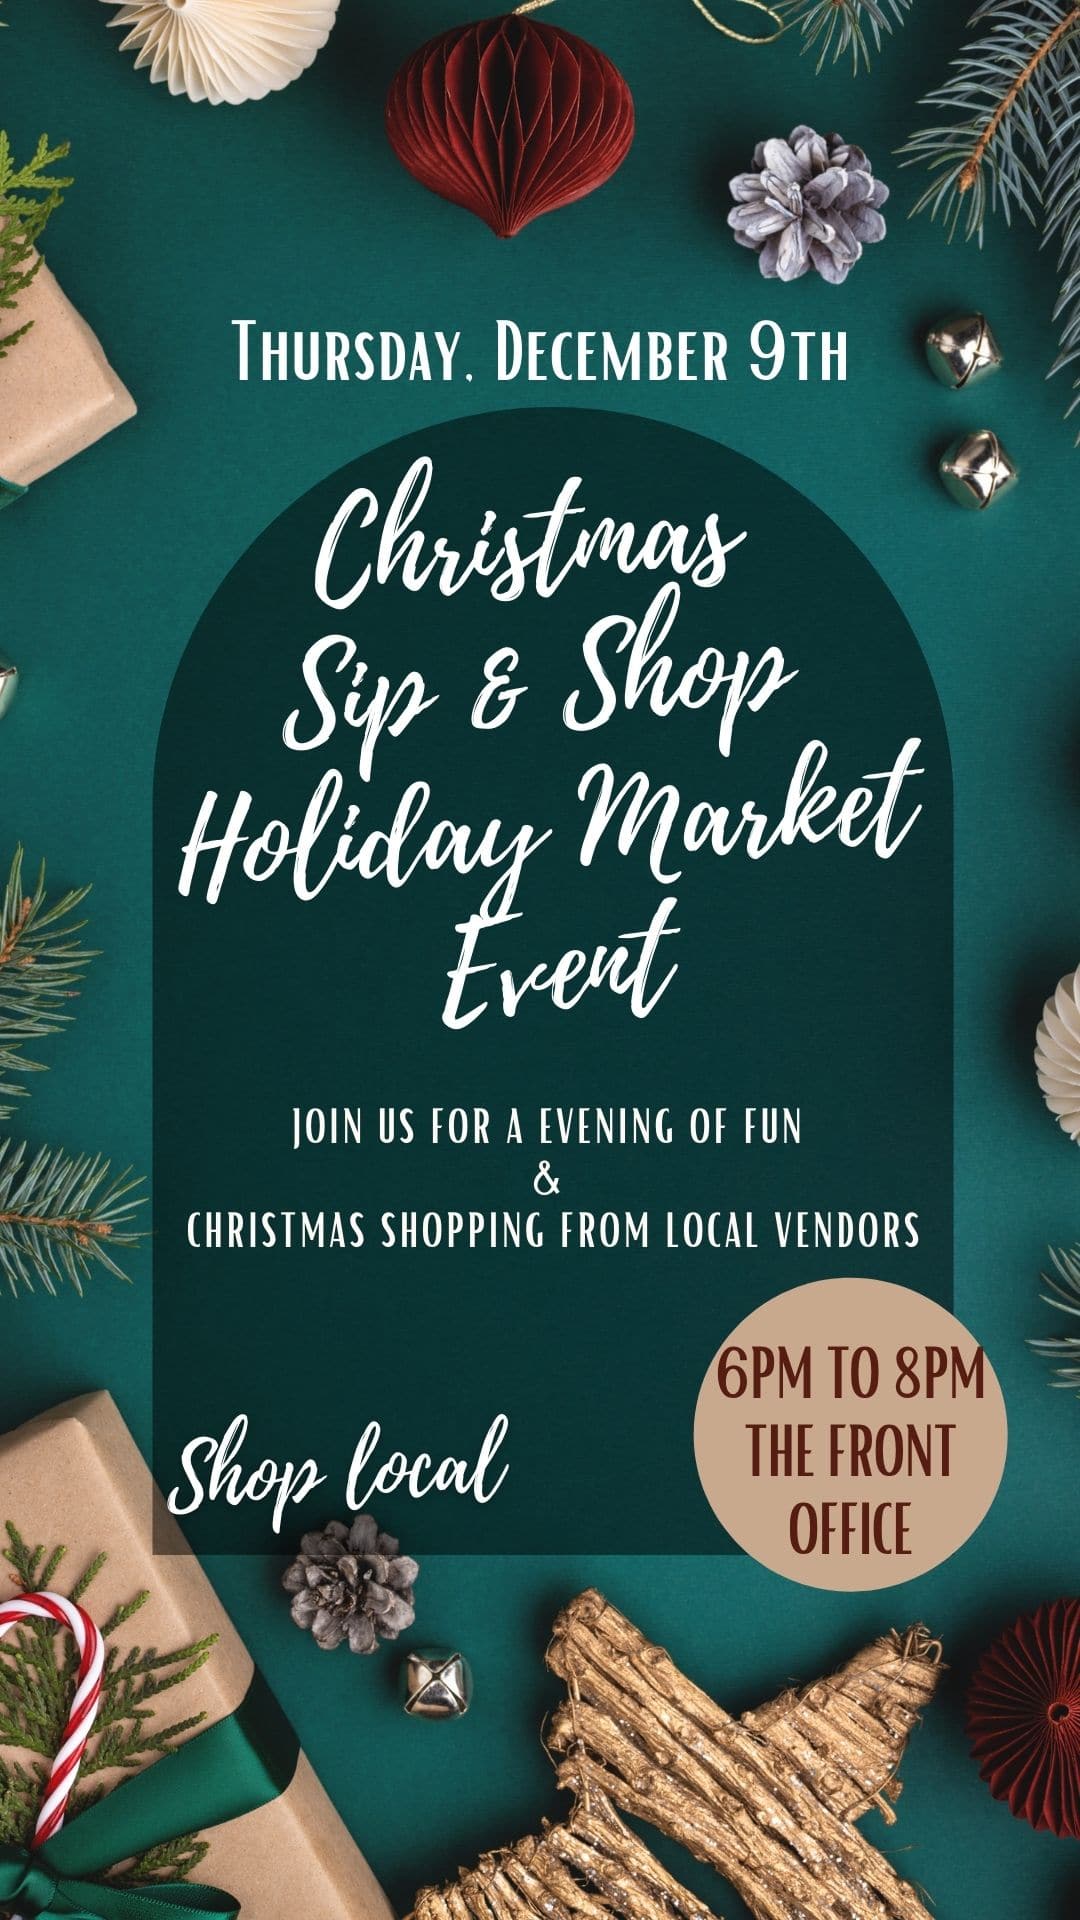 Apartments for rent in The Woodlands TX present a special Christmas sip and shop holiday market event.